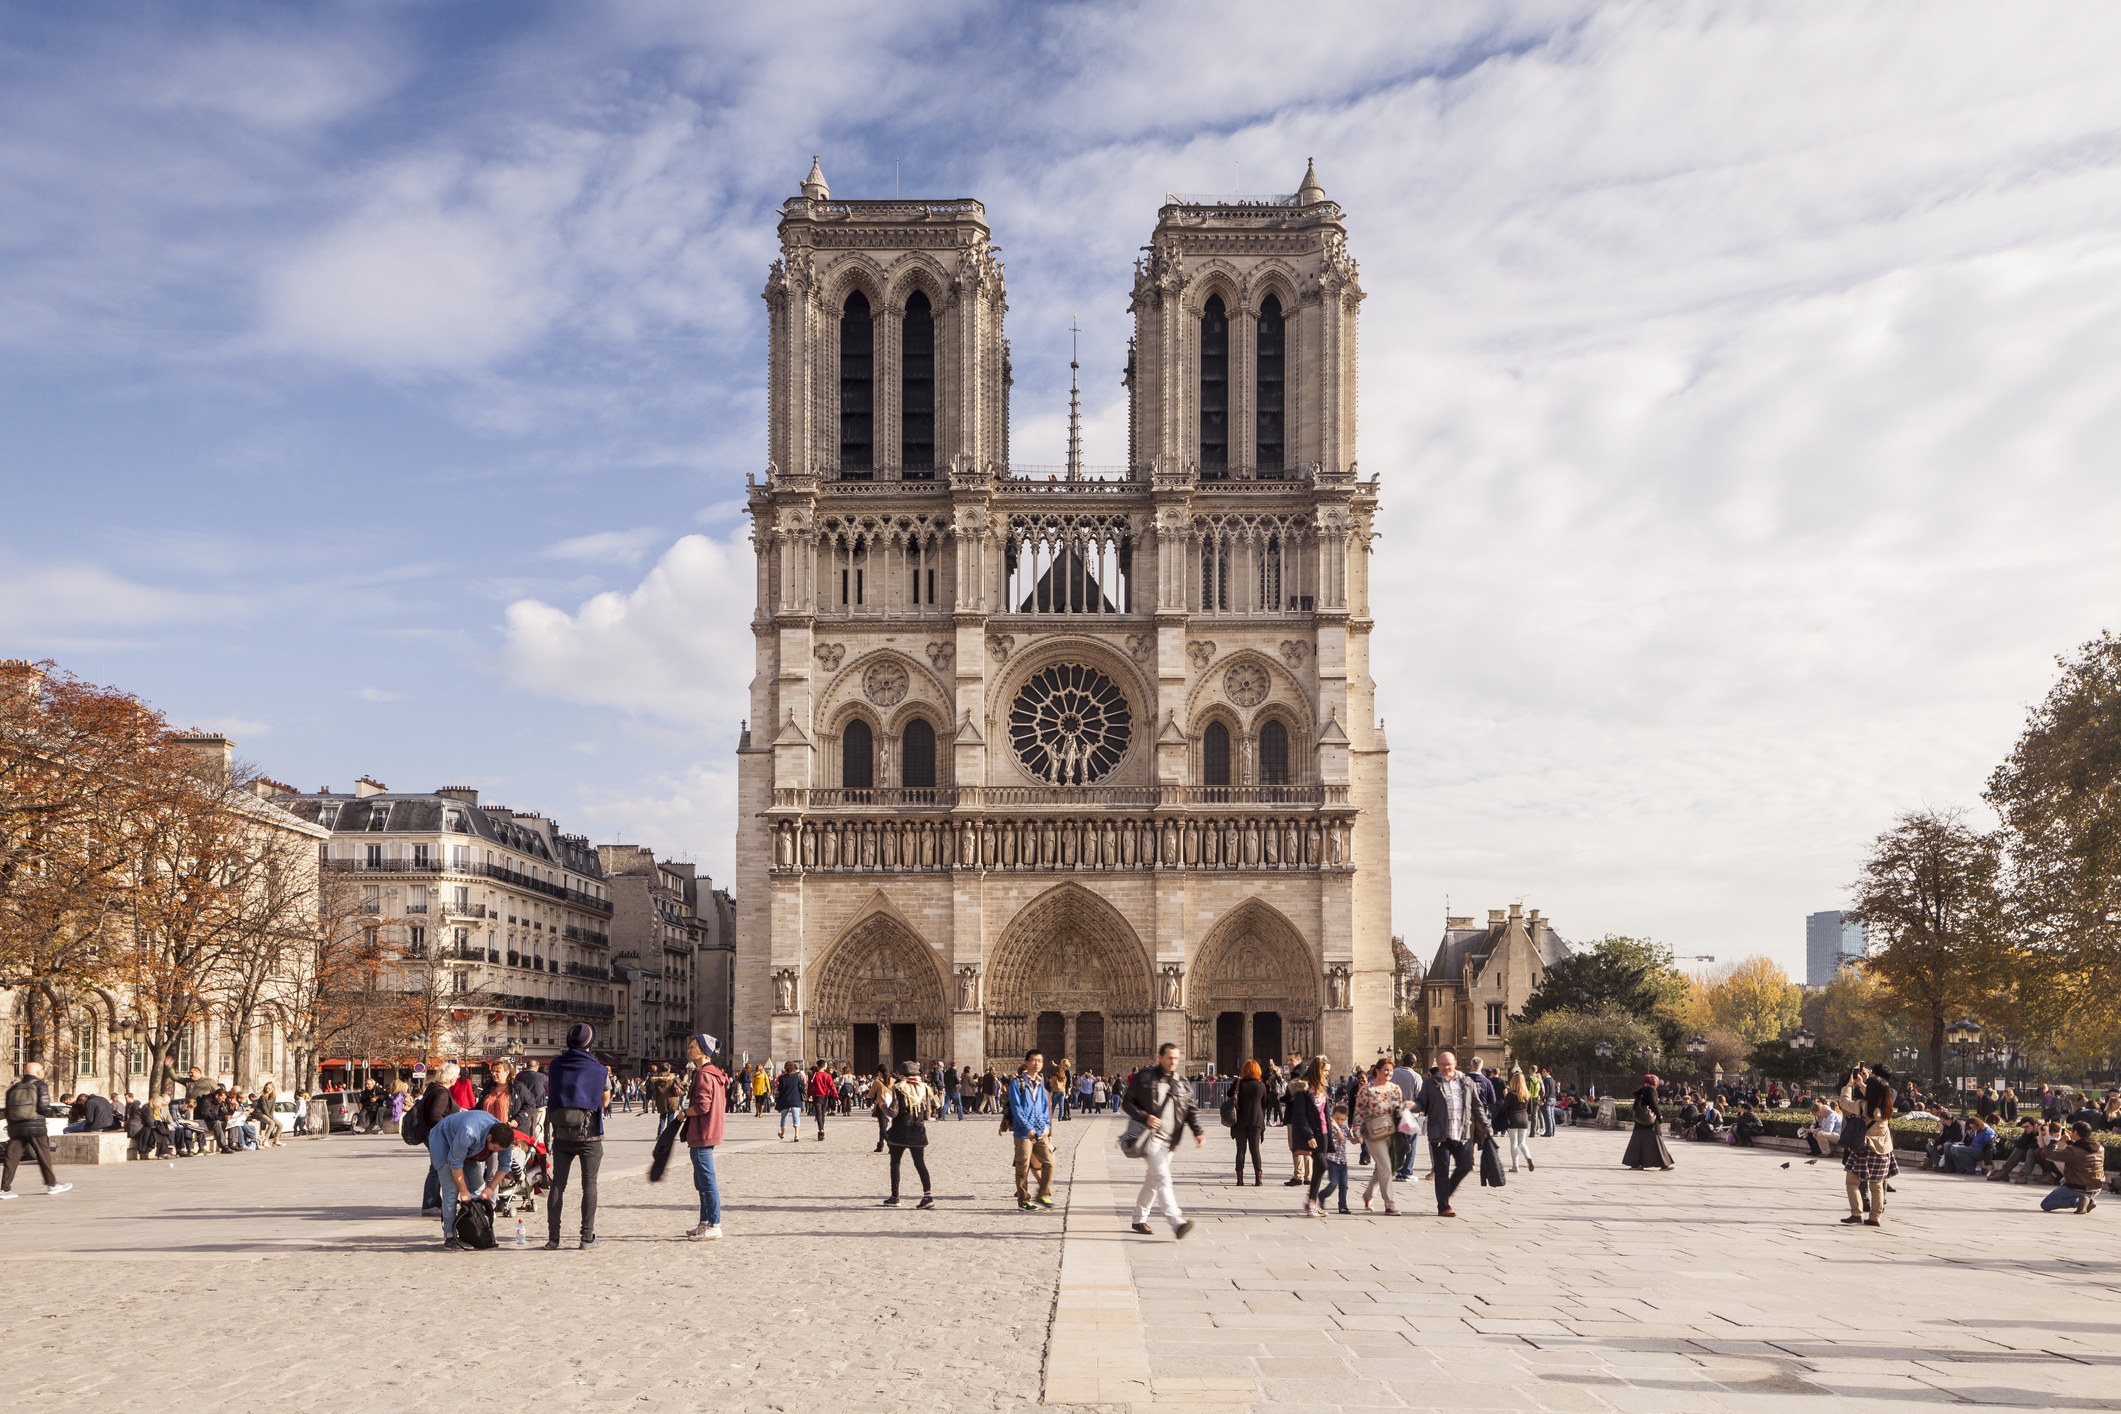 The exterior of Notre Dame Cathedral in Paris